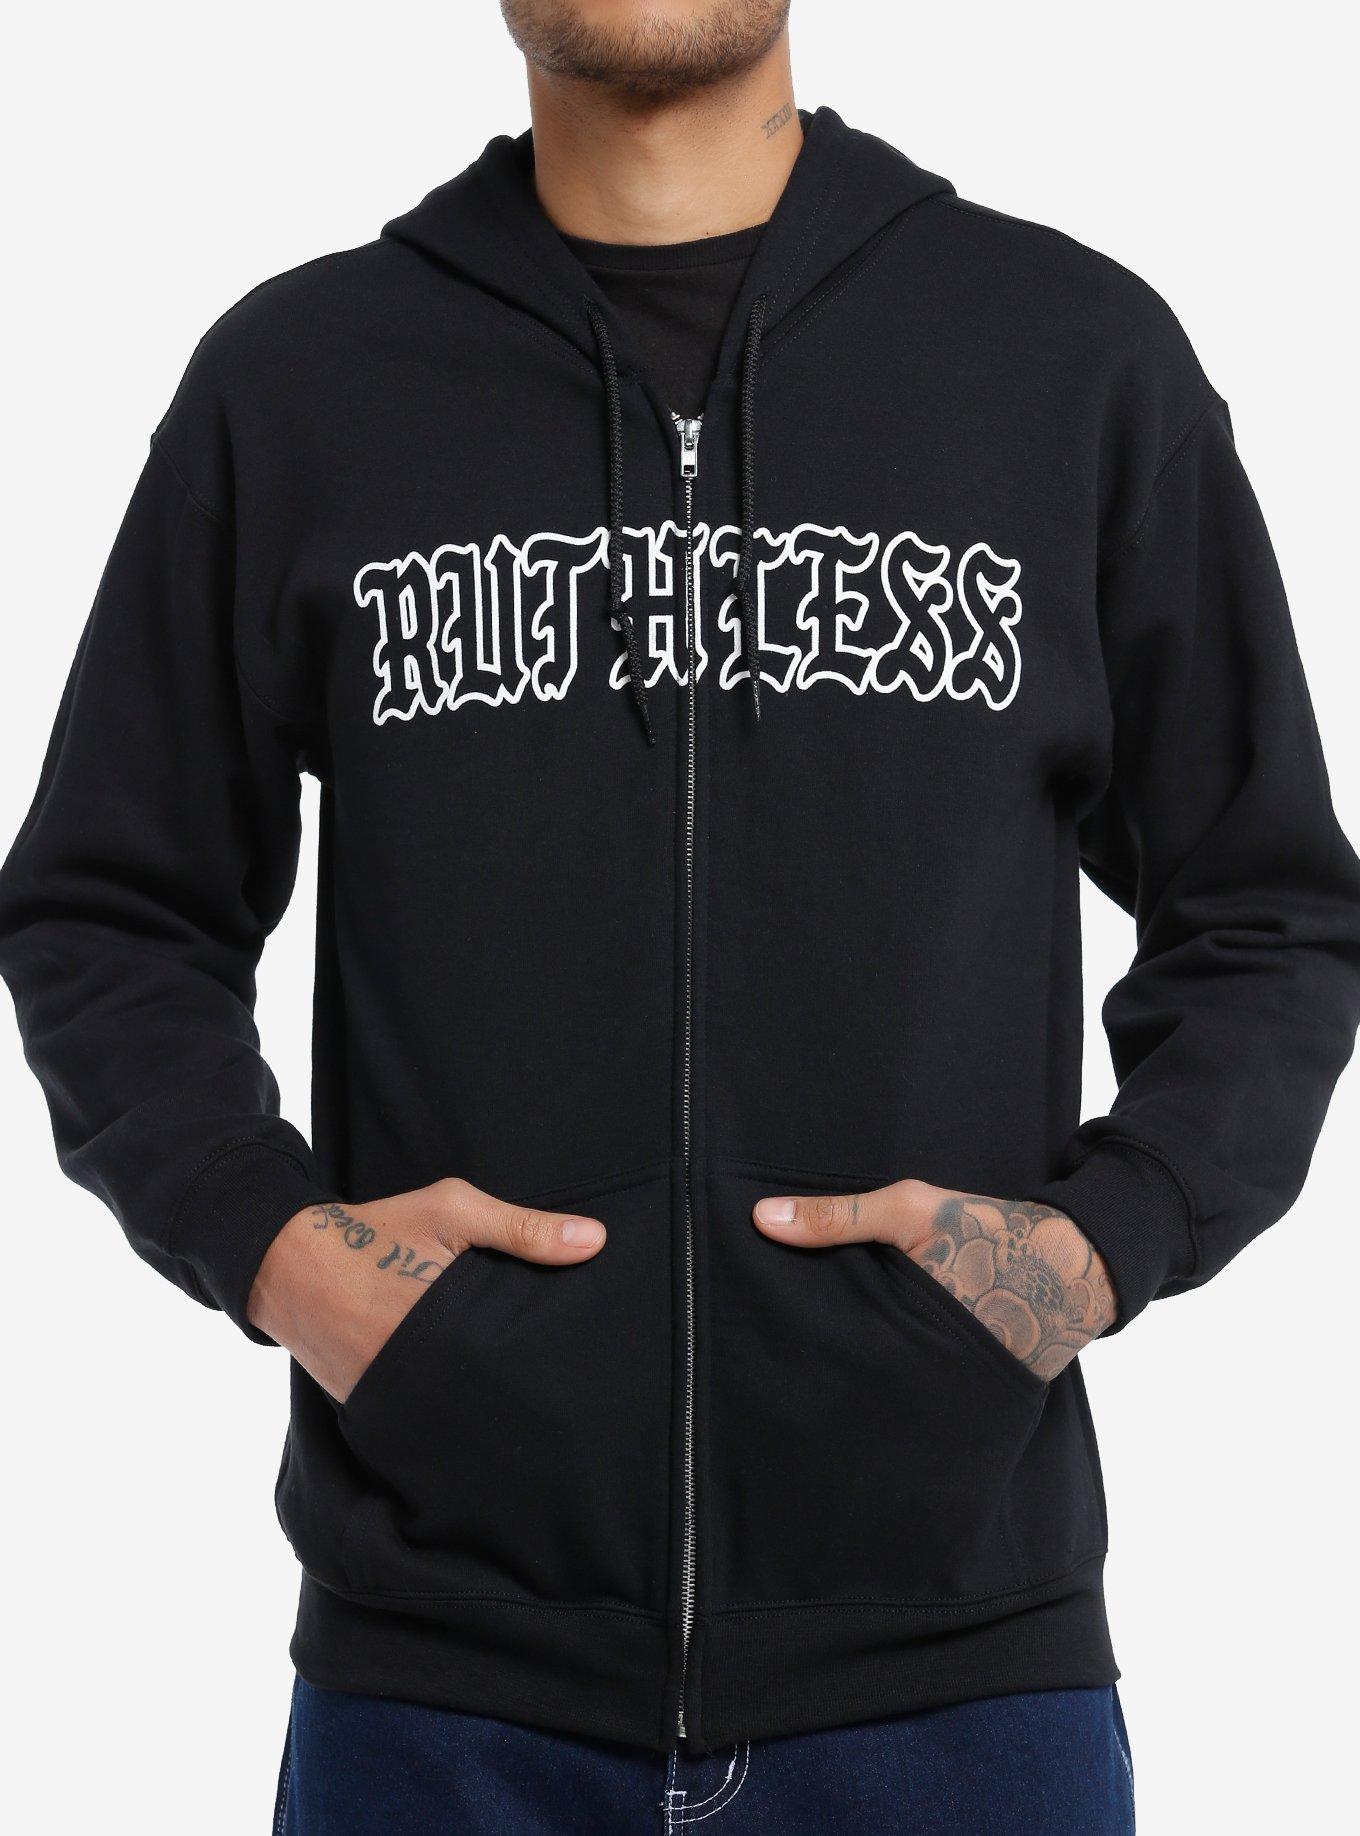 Social Collision® Ruthless Butterfly Hoodie